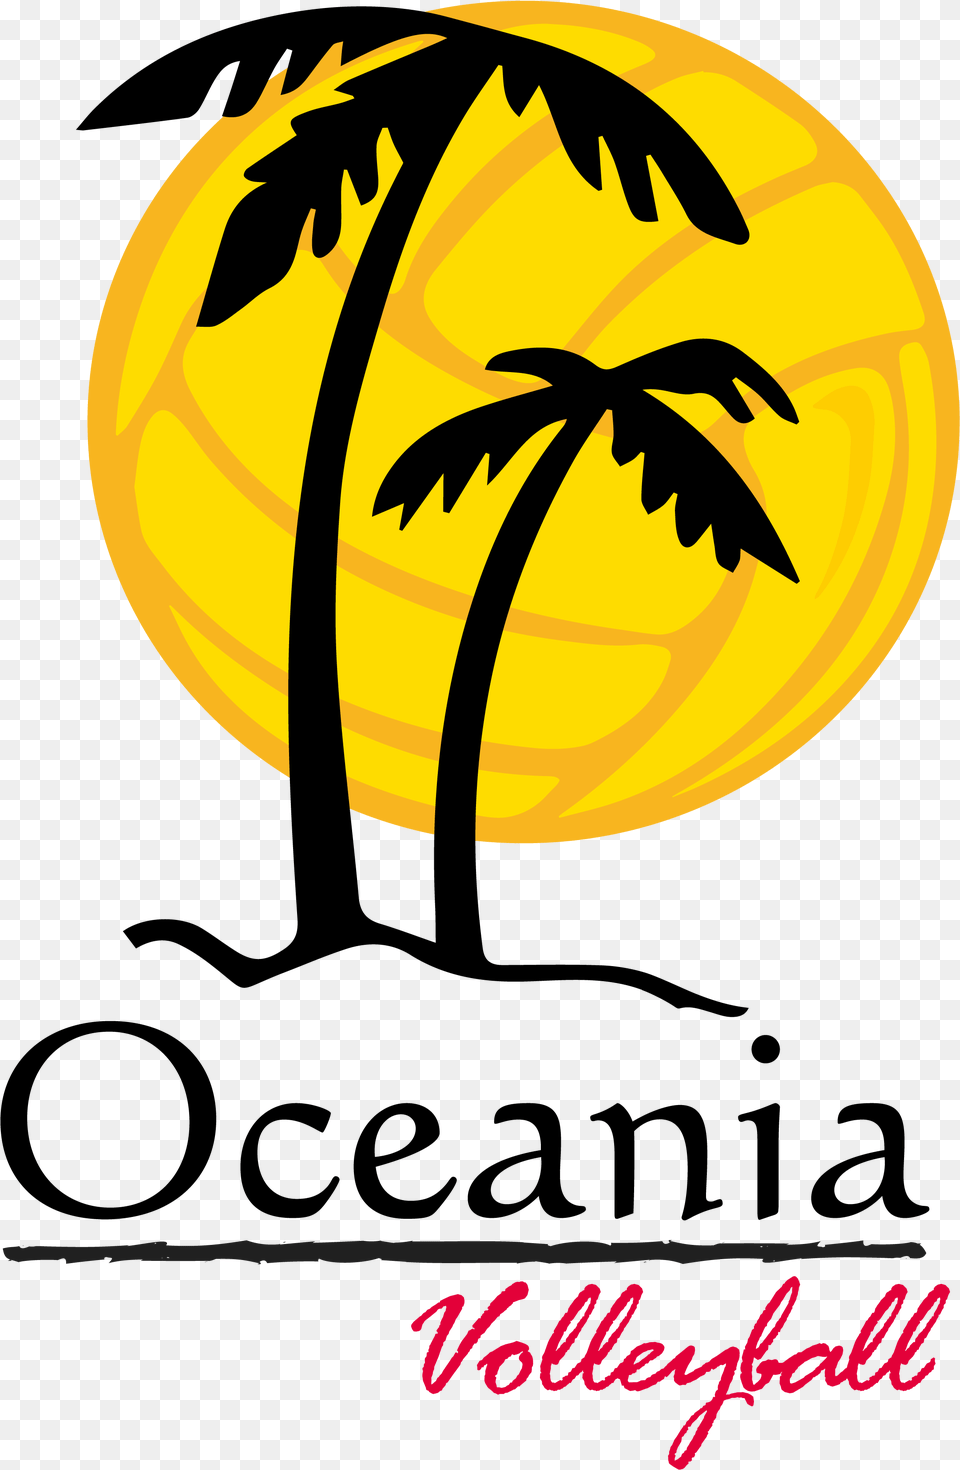 Home Oceania Volleyball Flamingo And Palm Tree Clip Art, Summer, Tennis Ball, Ball, Tennis Free Png